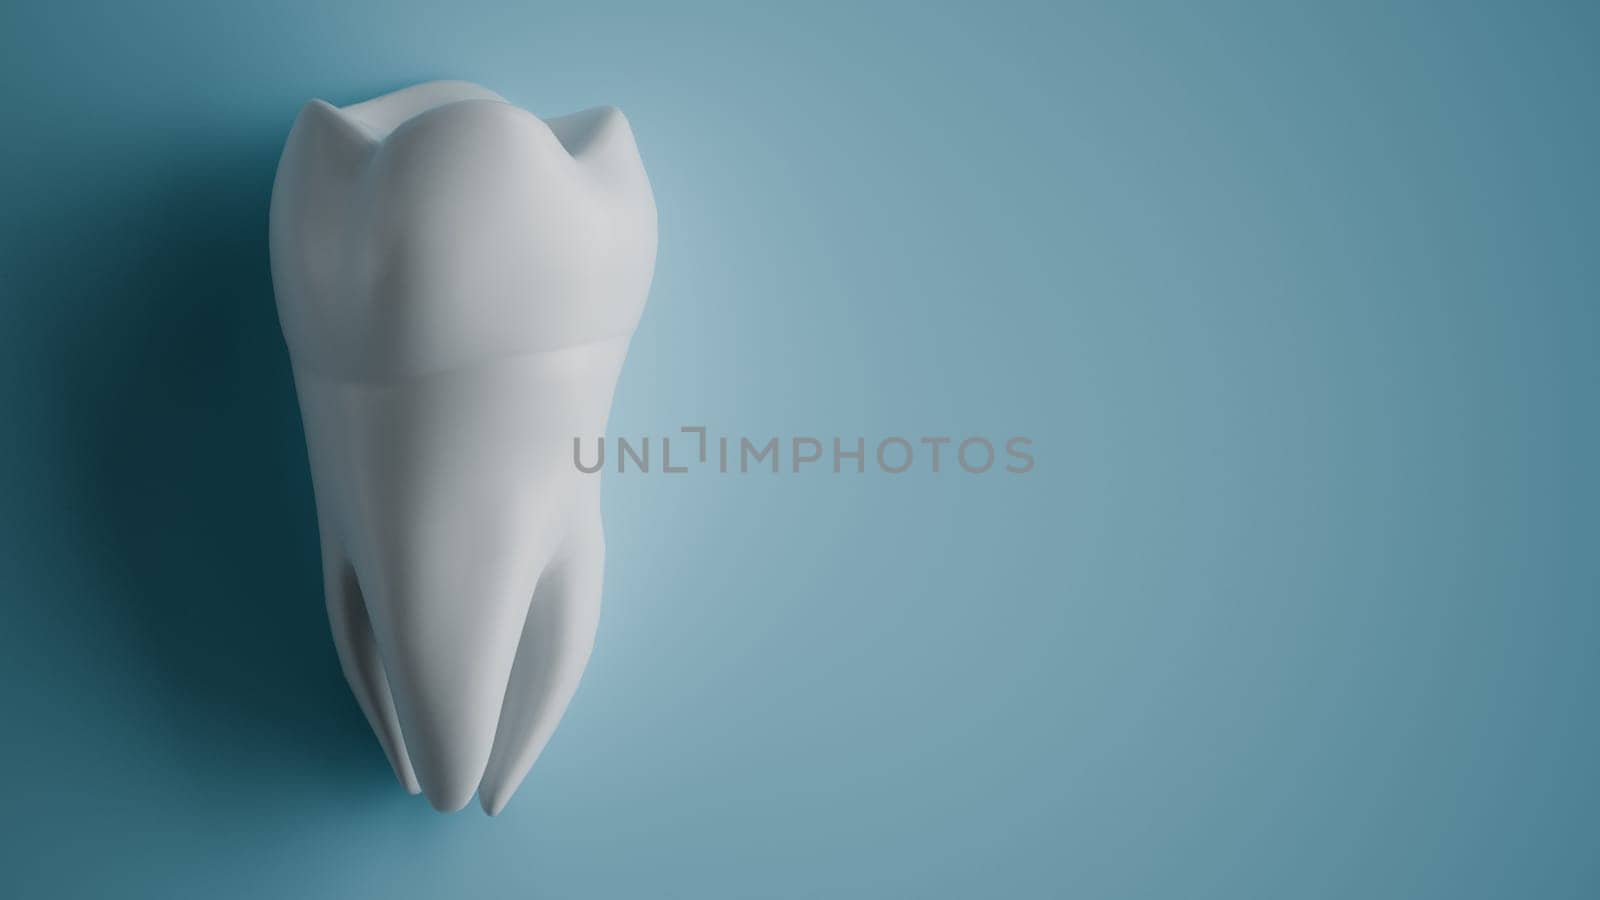 A highly detailed 3D rendering of a tooth against a light blue background.